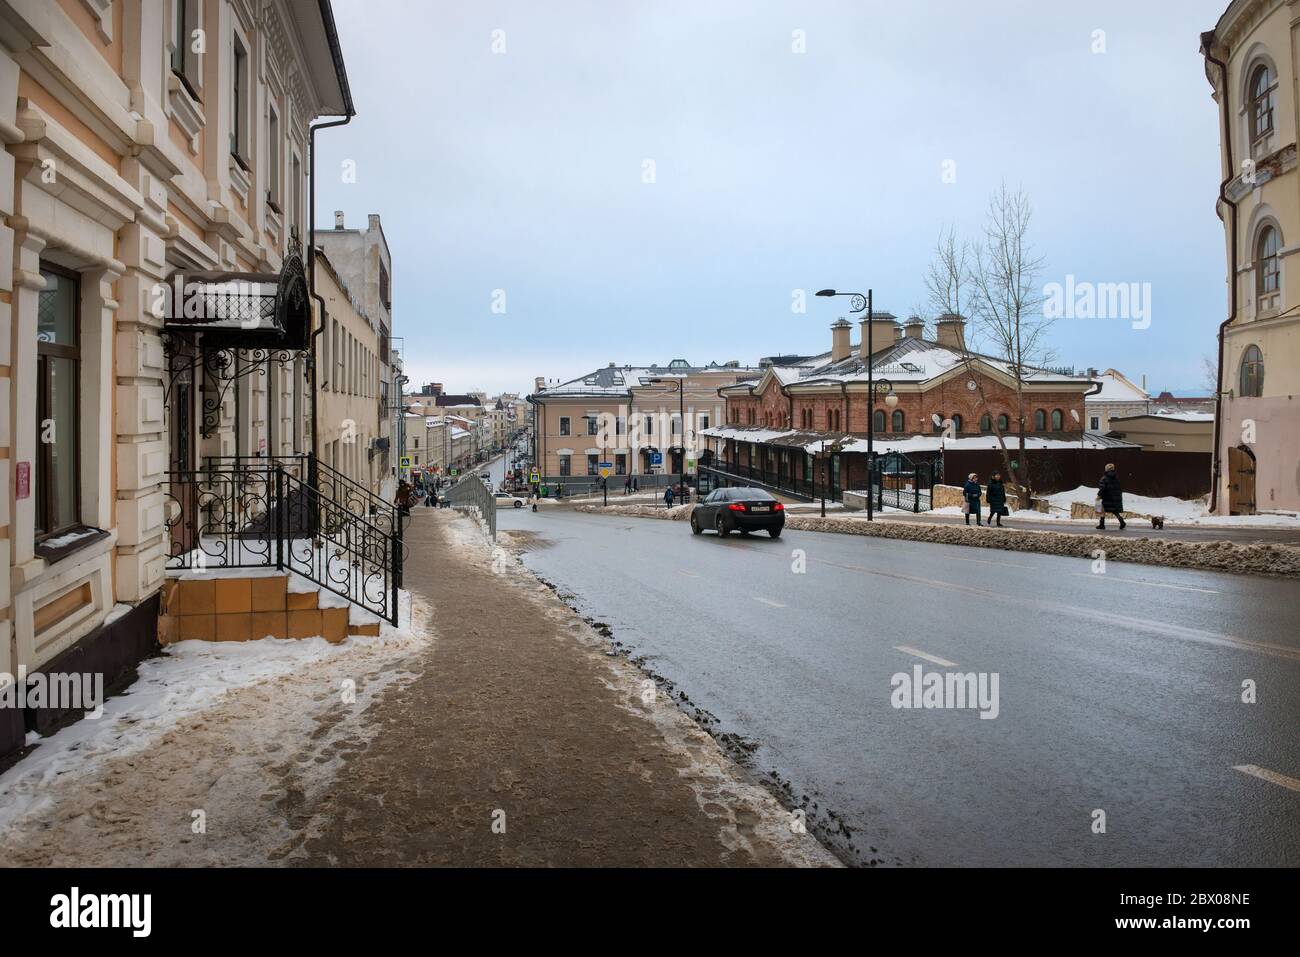 KAZAN, RUSSIA - JANUARY 5 2020: View of Chernyshevsky street on a winter day in cloudy weather Stock Photo